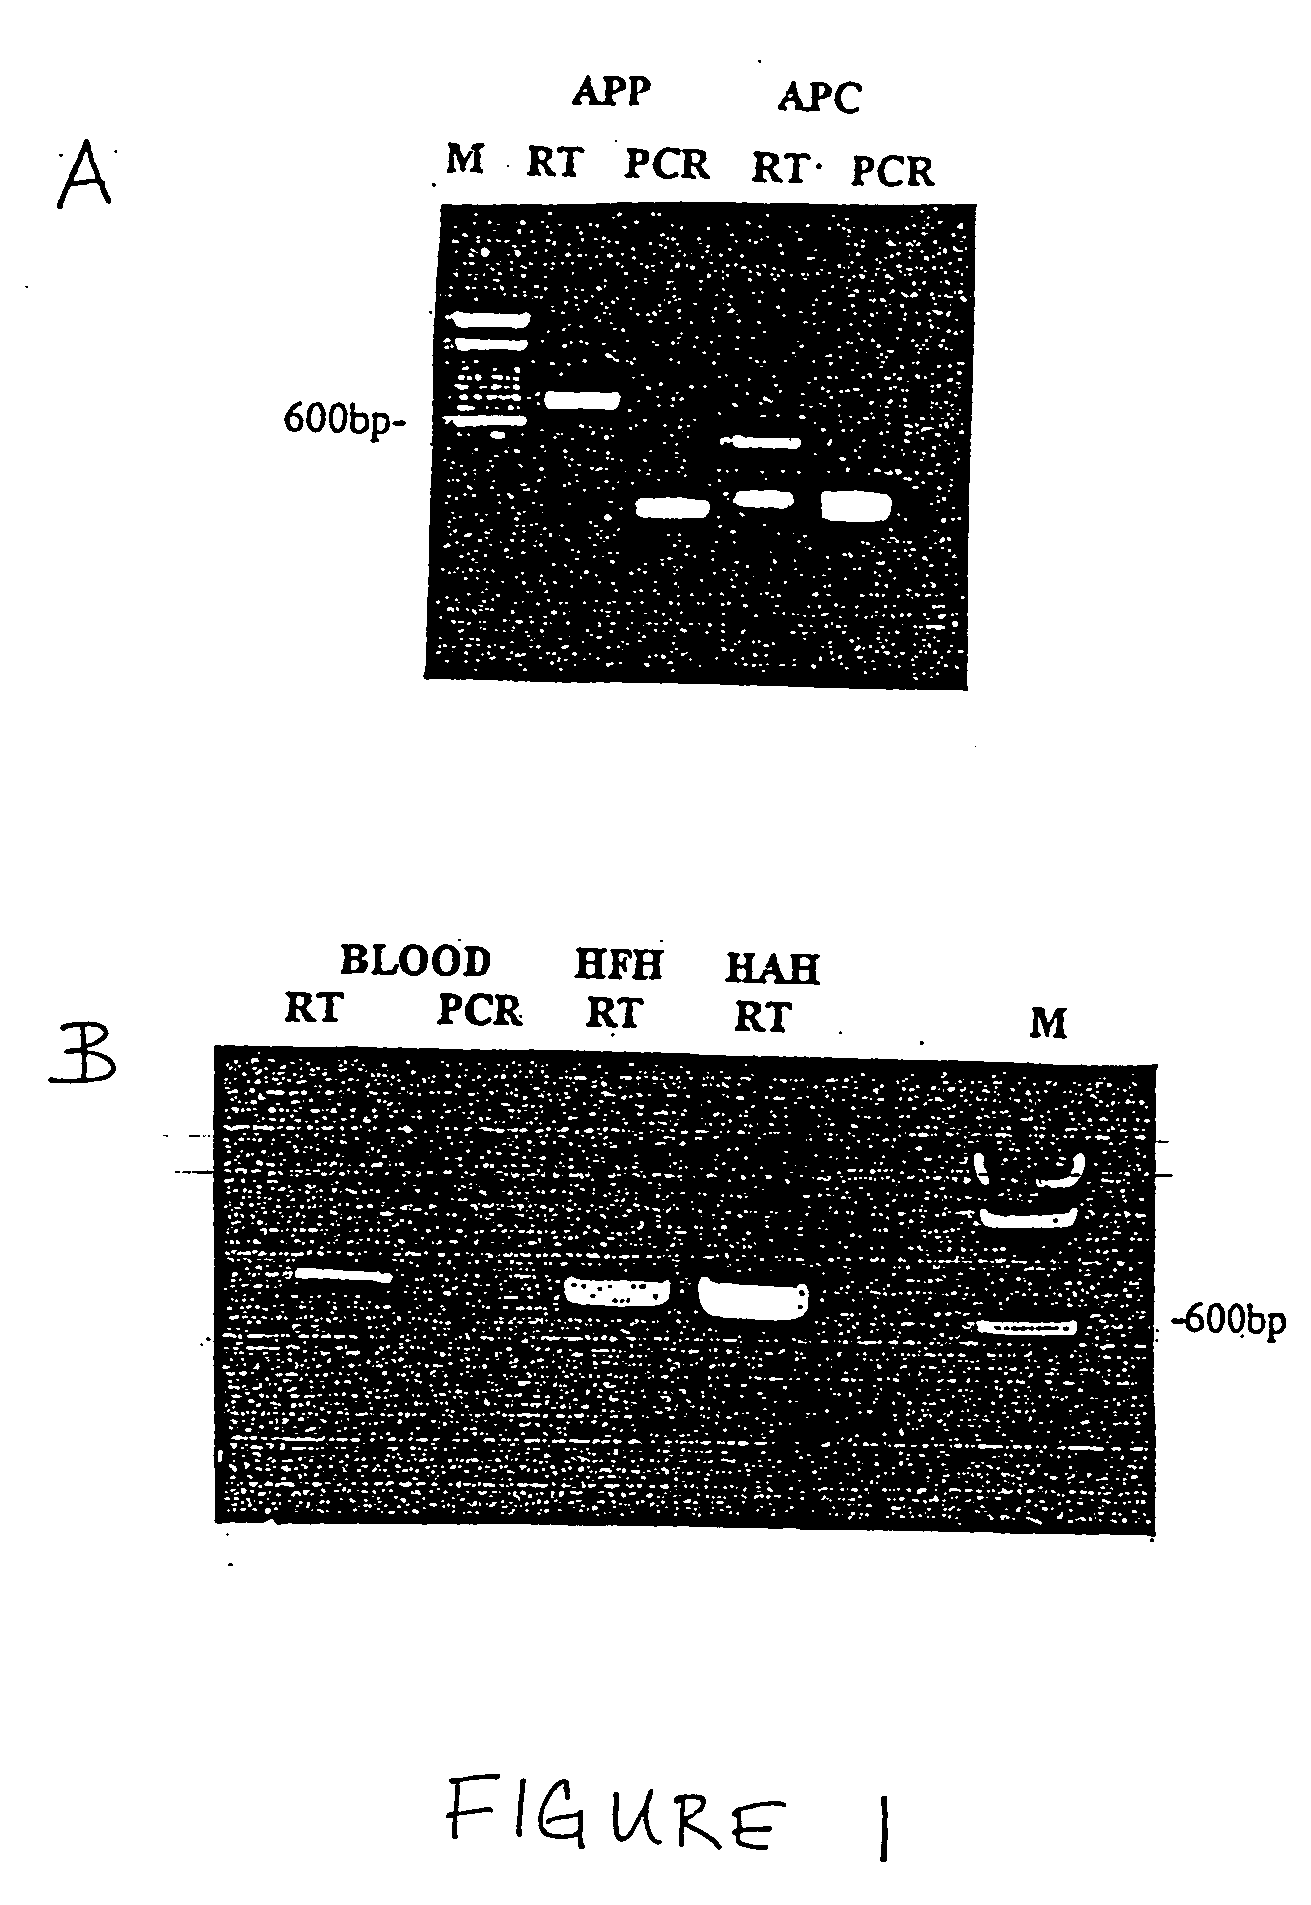 Method for the detection of coronary artery disease related gene transcripts in blood